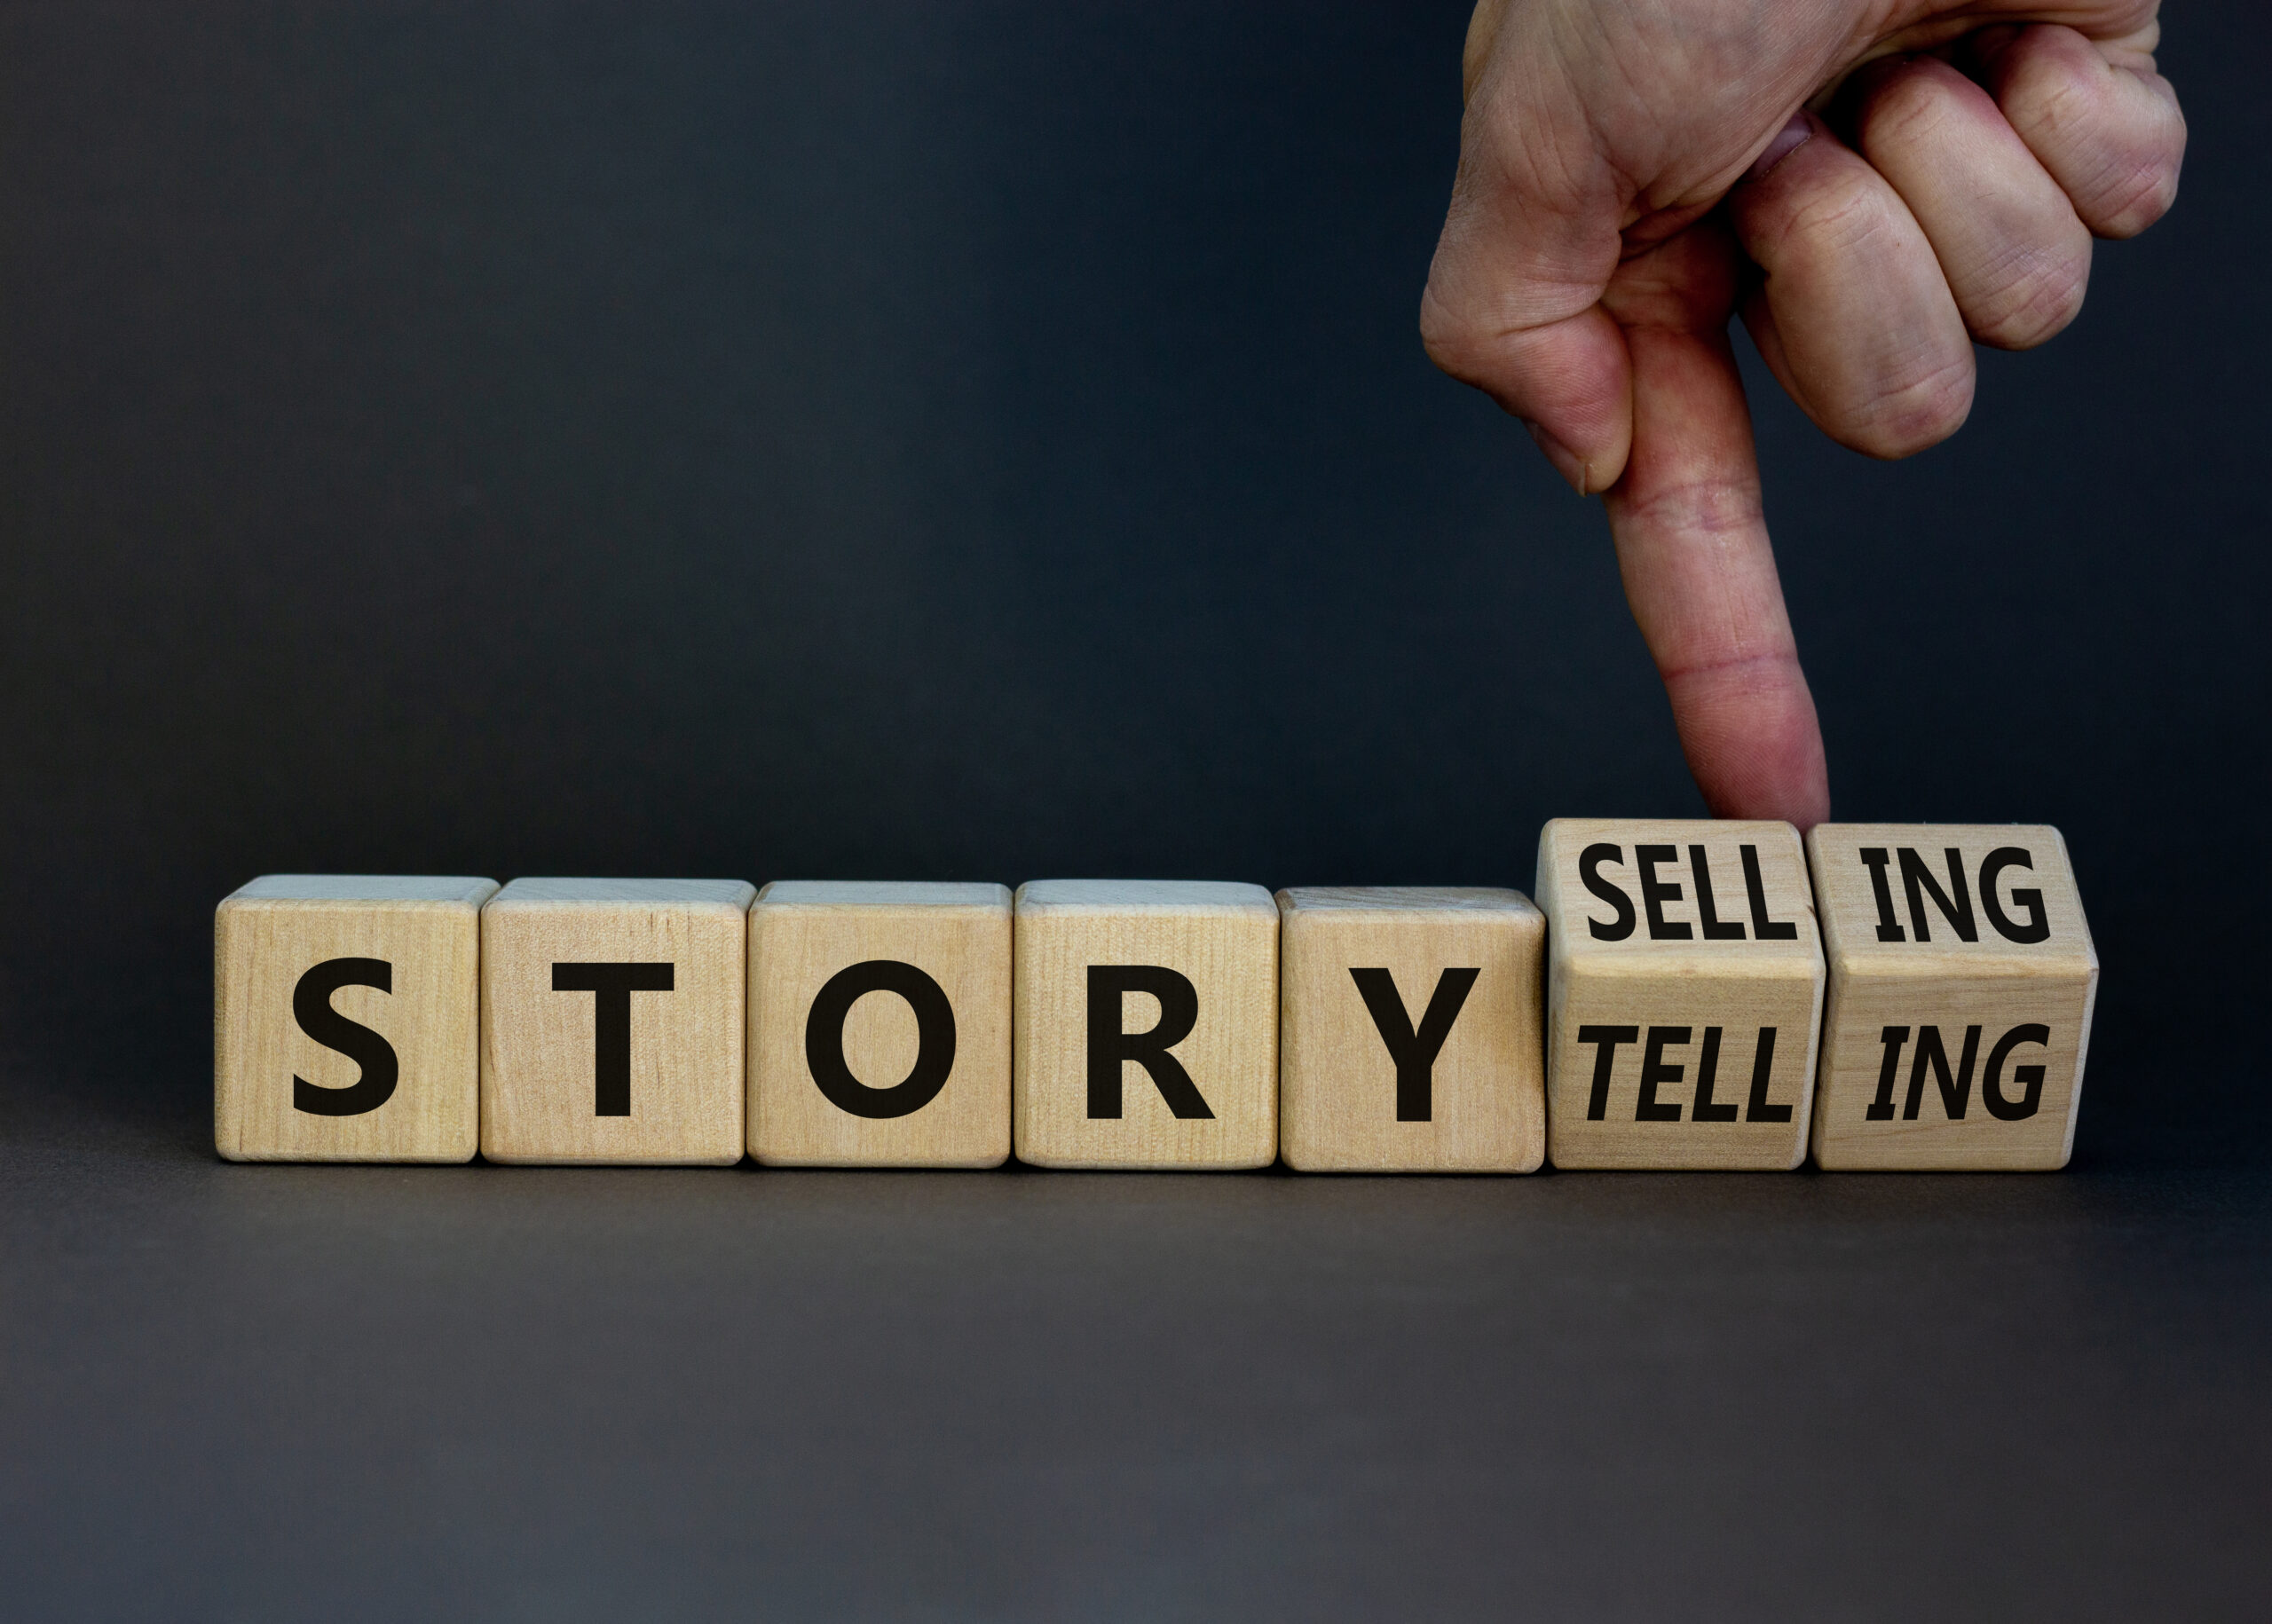 Use Storytelling to Sway Customers